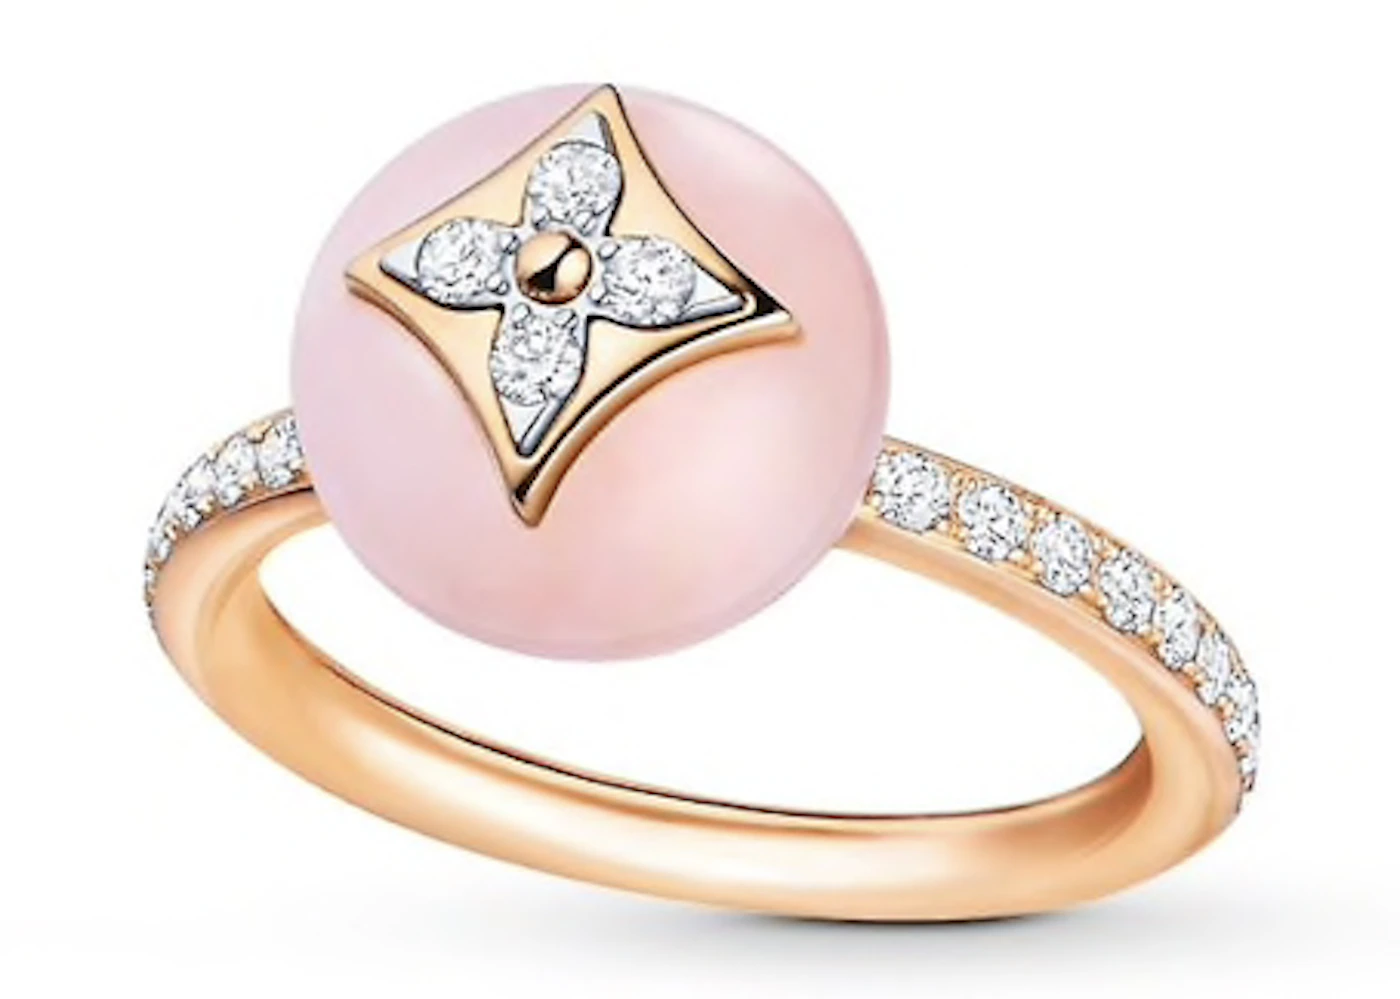 Louis Vuitton Color Blossom Ring, Pink Gold, White Gold, Pink Opal and PavÃ Diamond. Size 52